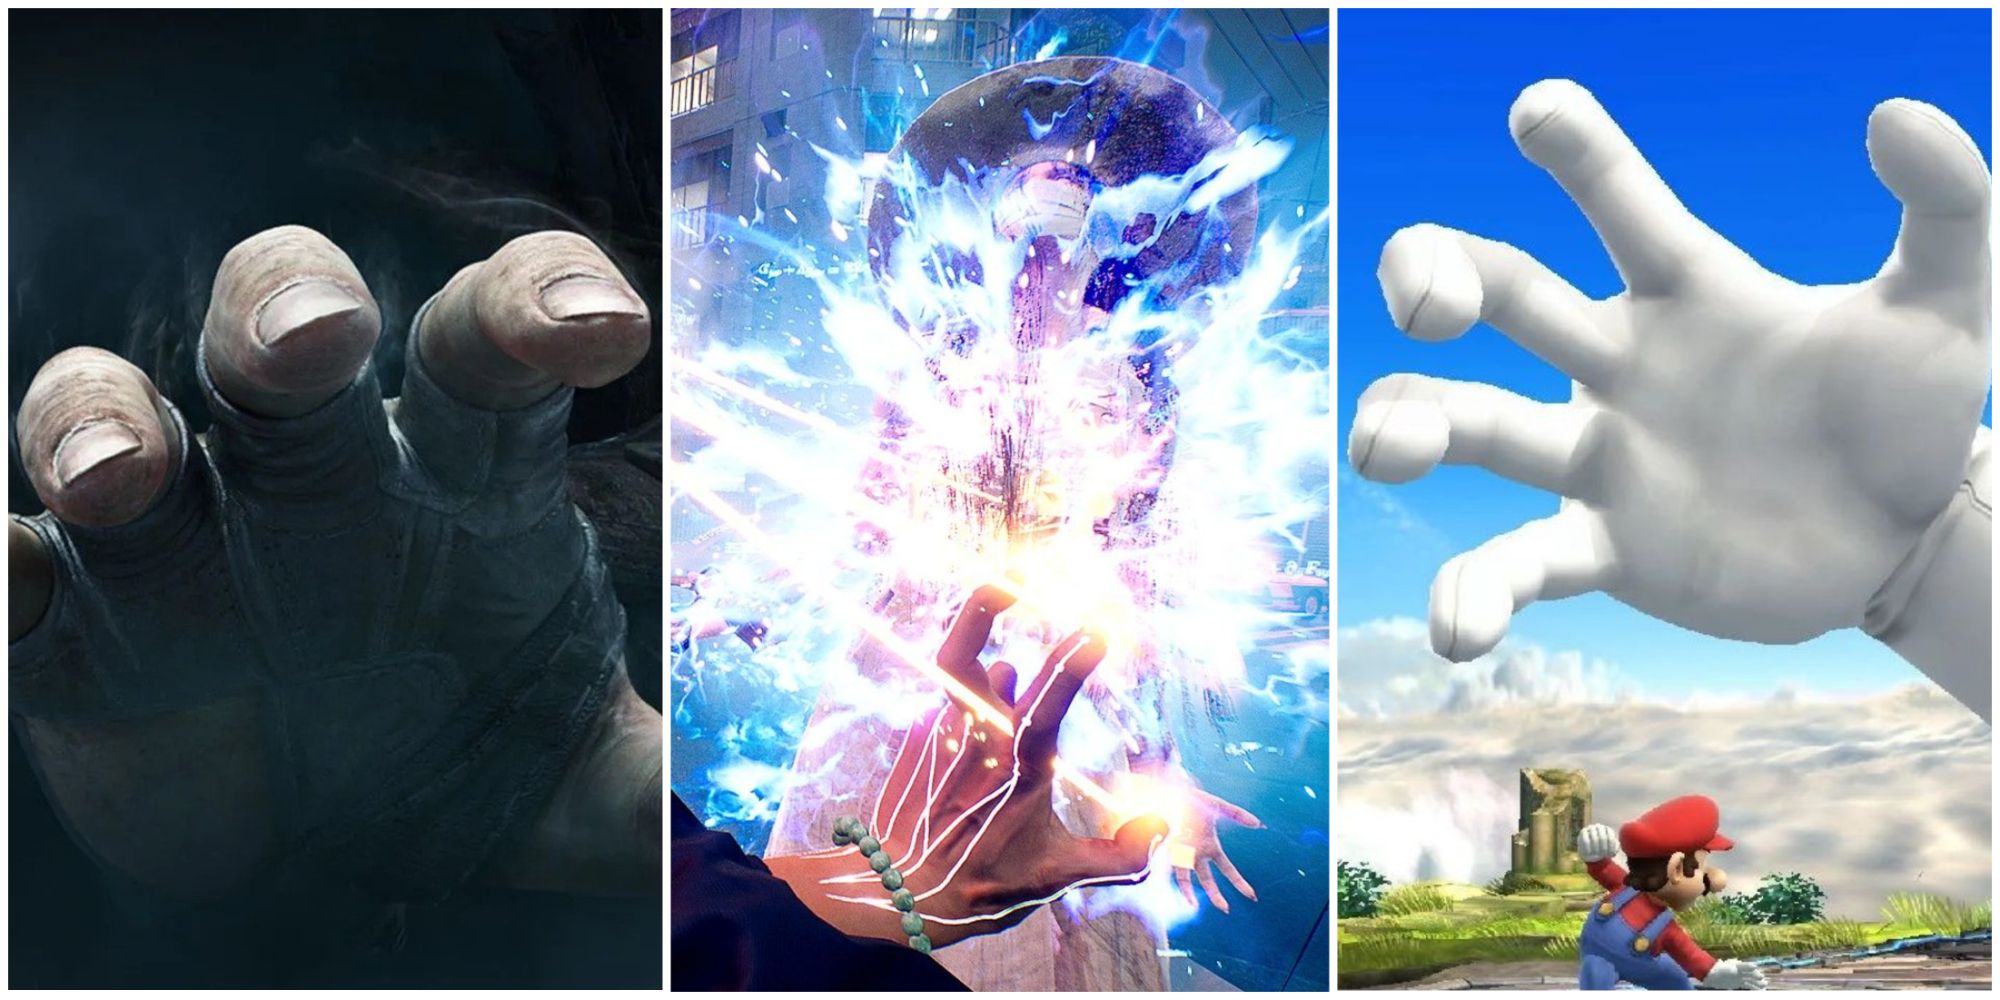 Garrett from Thief's hand reaching towards you, the ghostwire being used in Ghostwire Tokyo, and the Master Hand about to attack Mario, left to right